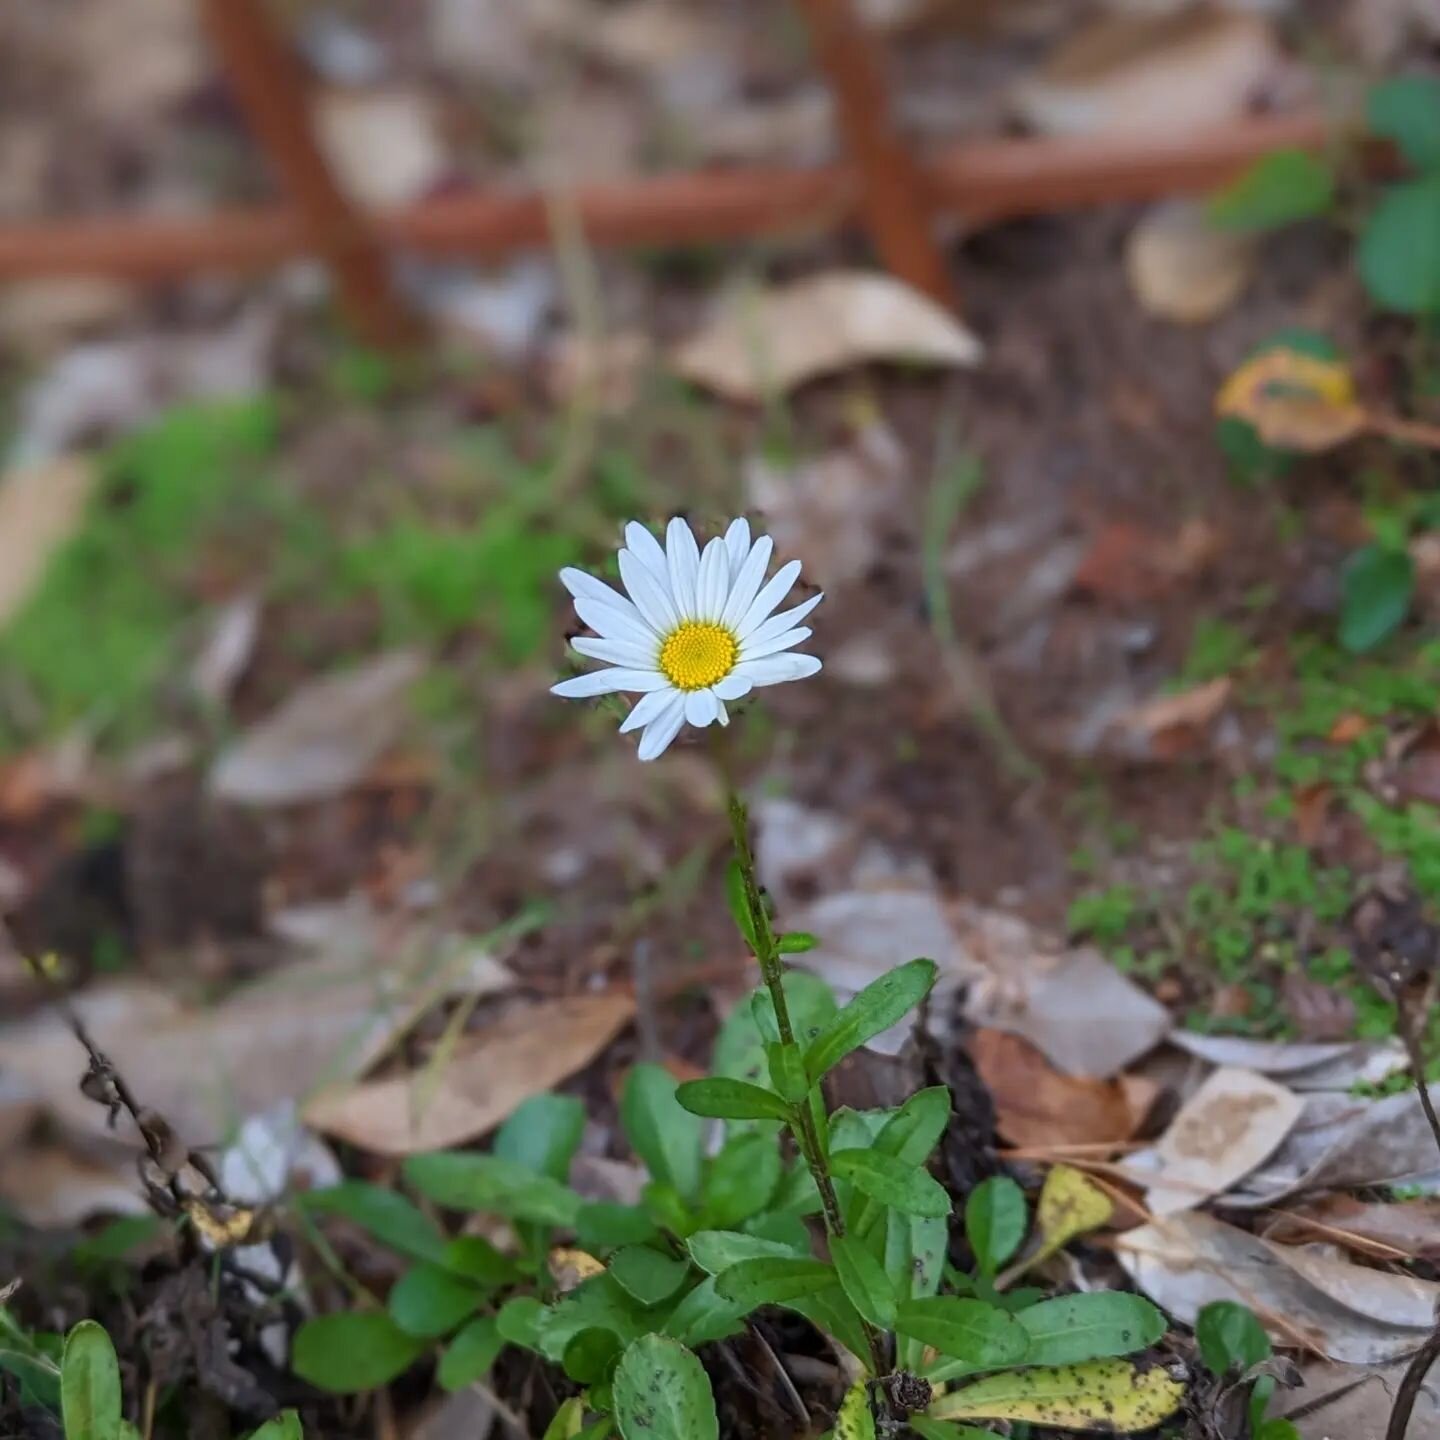 daisies are my favorite flower

I know you didn't ask but if you want to know how to make me smile any day of the year, a daisy will do it. 

this post is an announcement of sorts. my social media is returning to personal matters and things I care mo